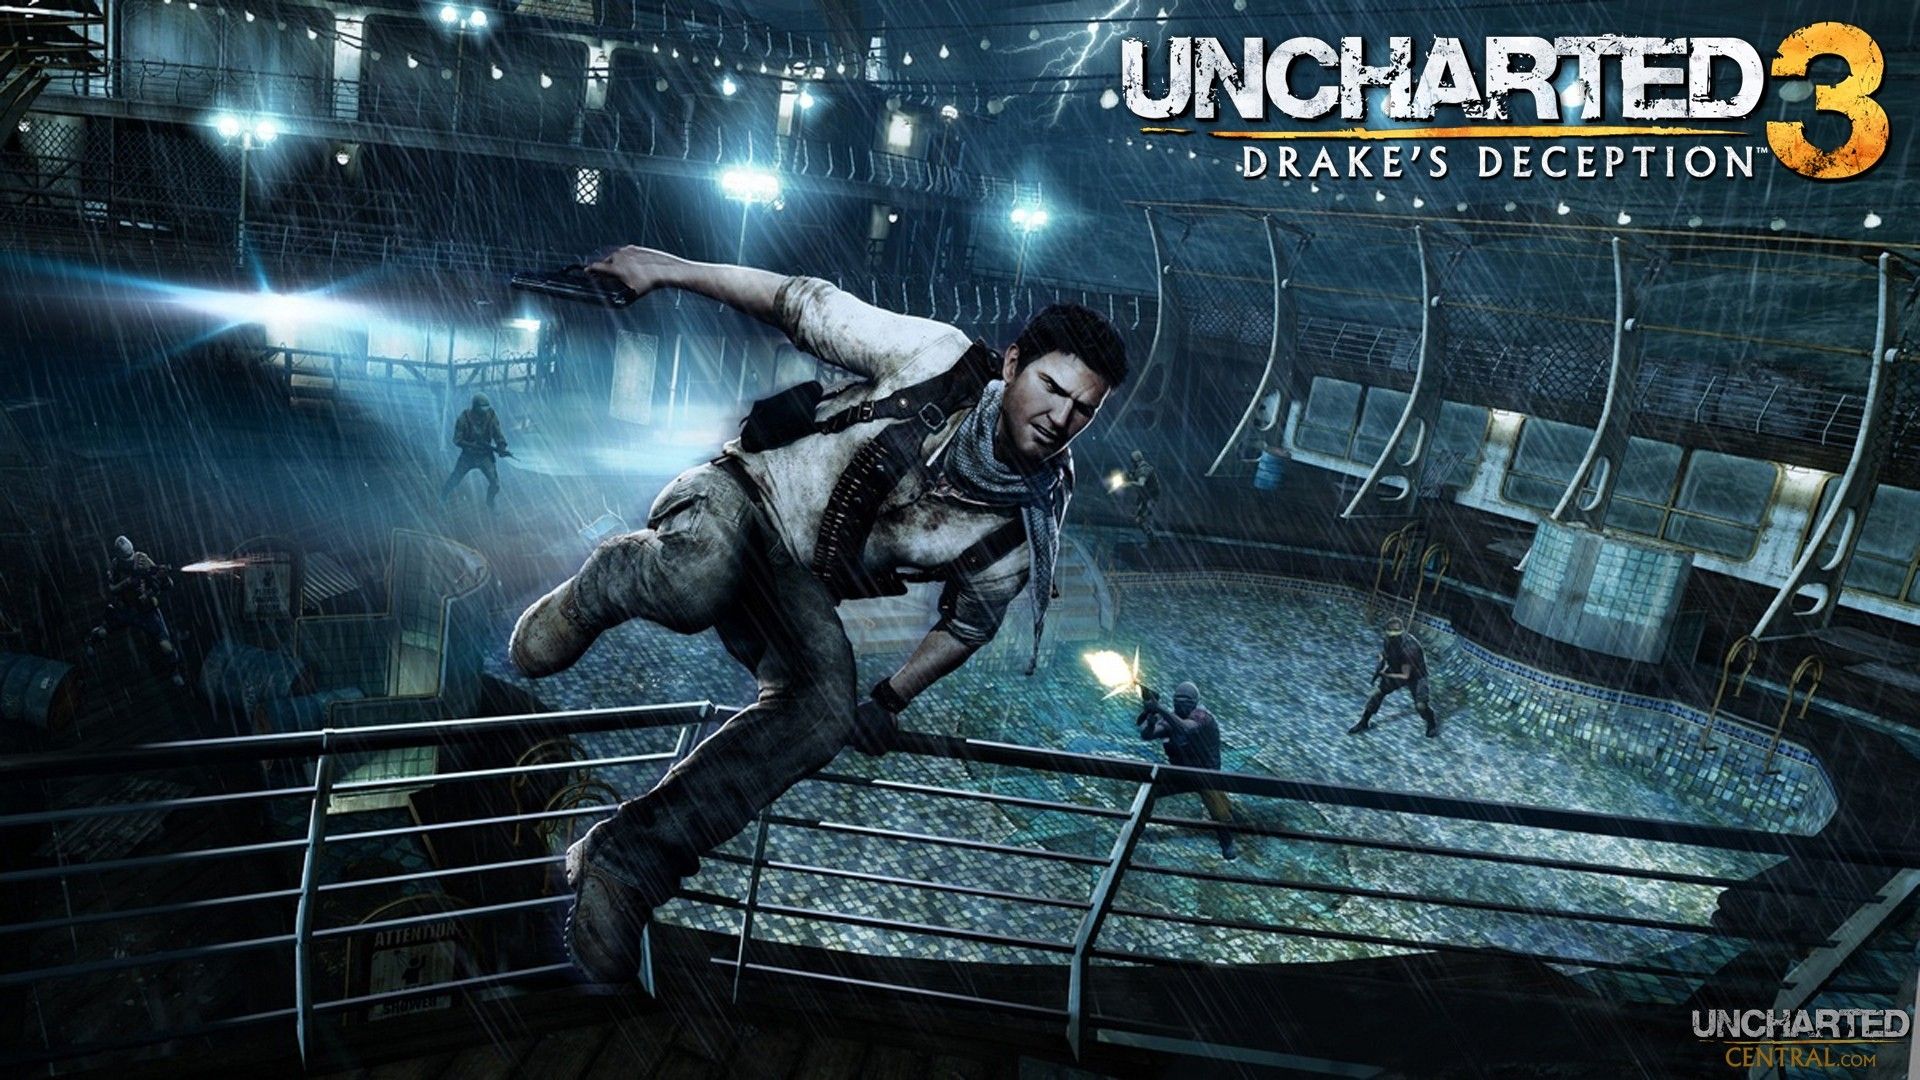 Download Wallpaper 1920x1080 uncharted 3 drakes deception, jump, fence, enemies, night, rain Full HD 1080p HD Background